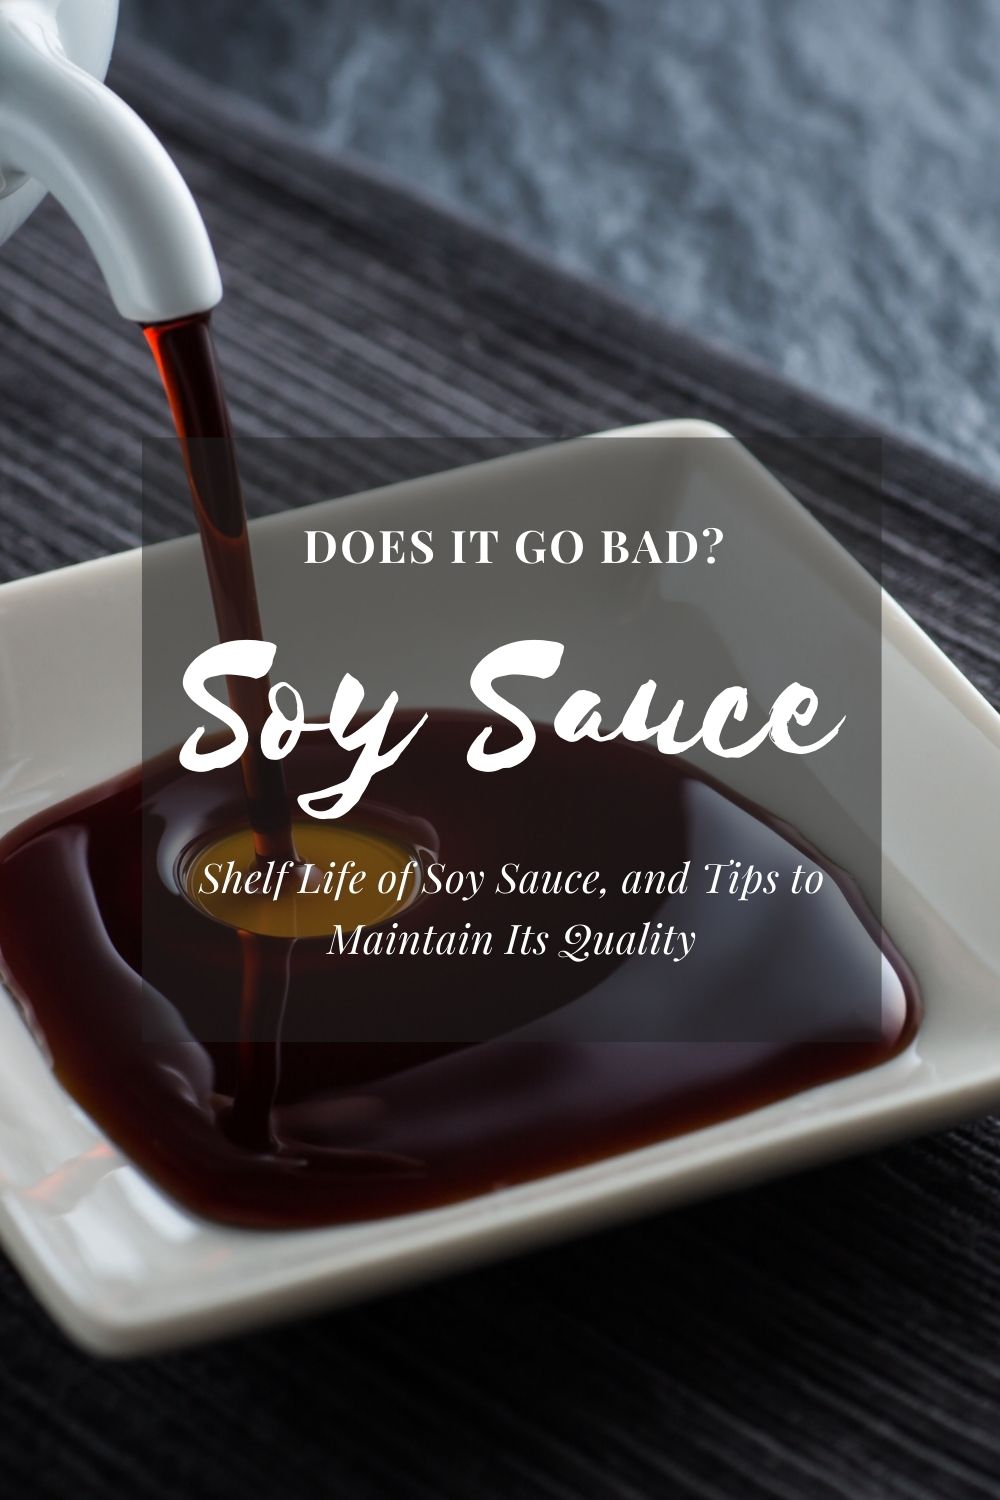 Does Soy Sauce Go Bad? The Shelf Life of Soy Sauce and Tips to Maintain Its Quality